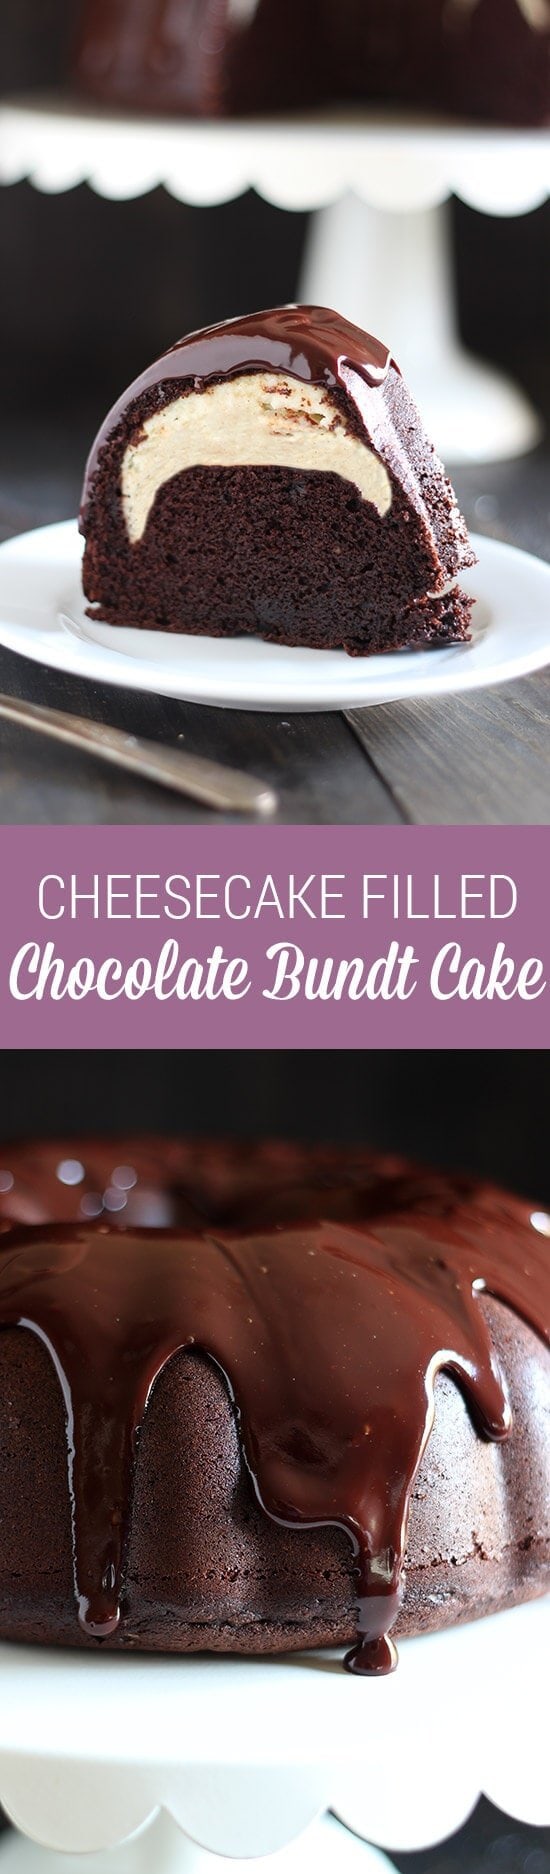 Who could beat this Cheesecake Filled Chocolate Bundt Cake with its rich yet tender chocolate cake, surprise cheesecake filling, and thick fudgy glaze? This recipe is YUM.